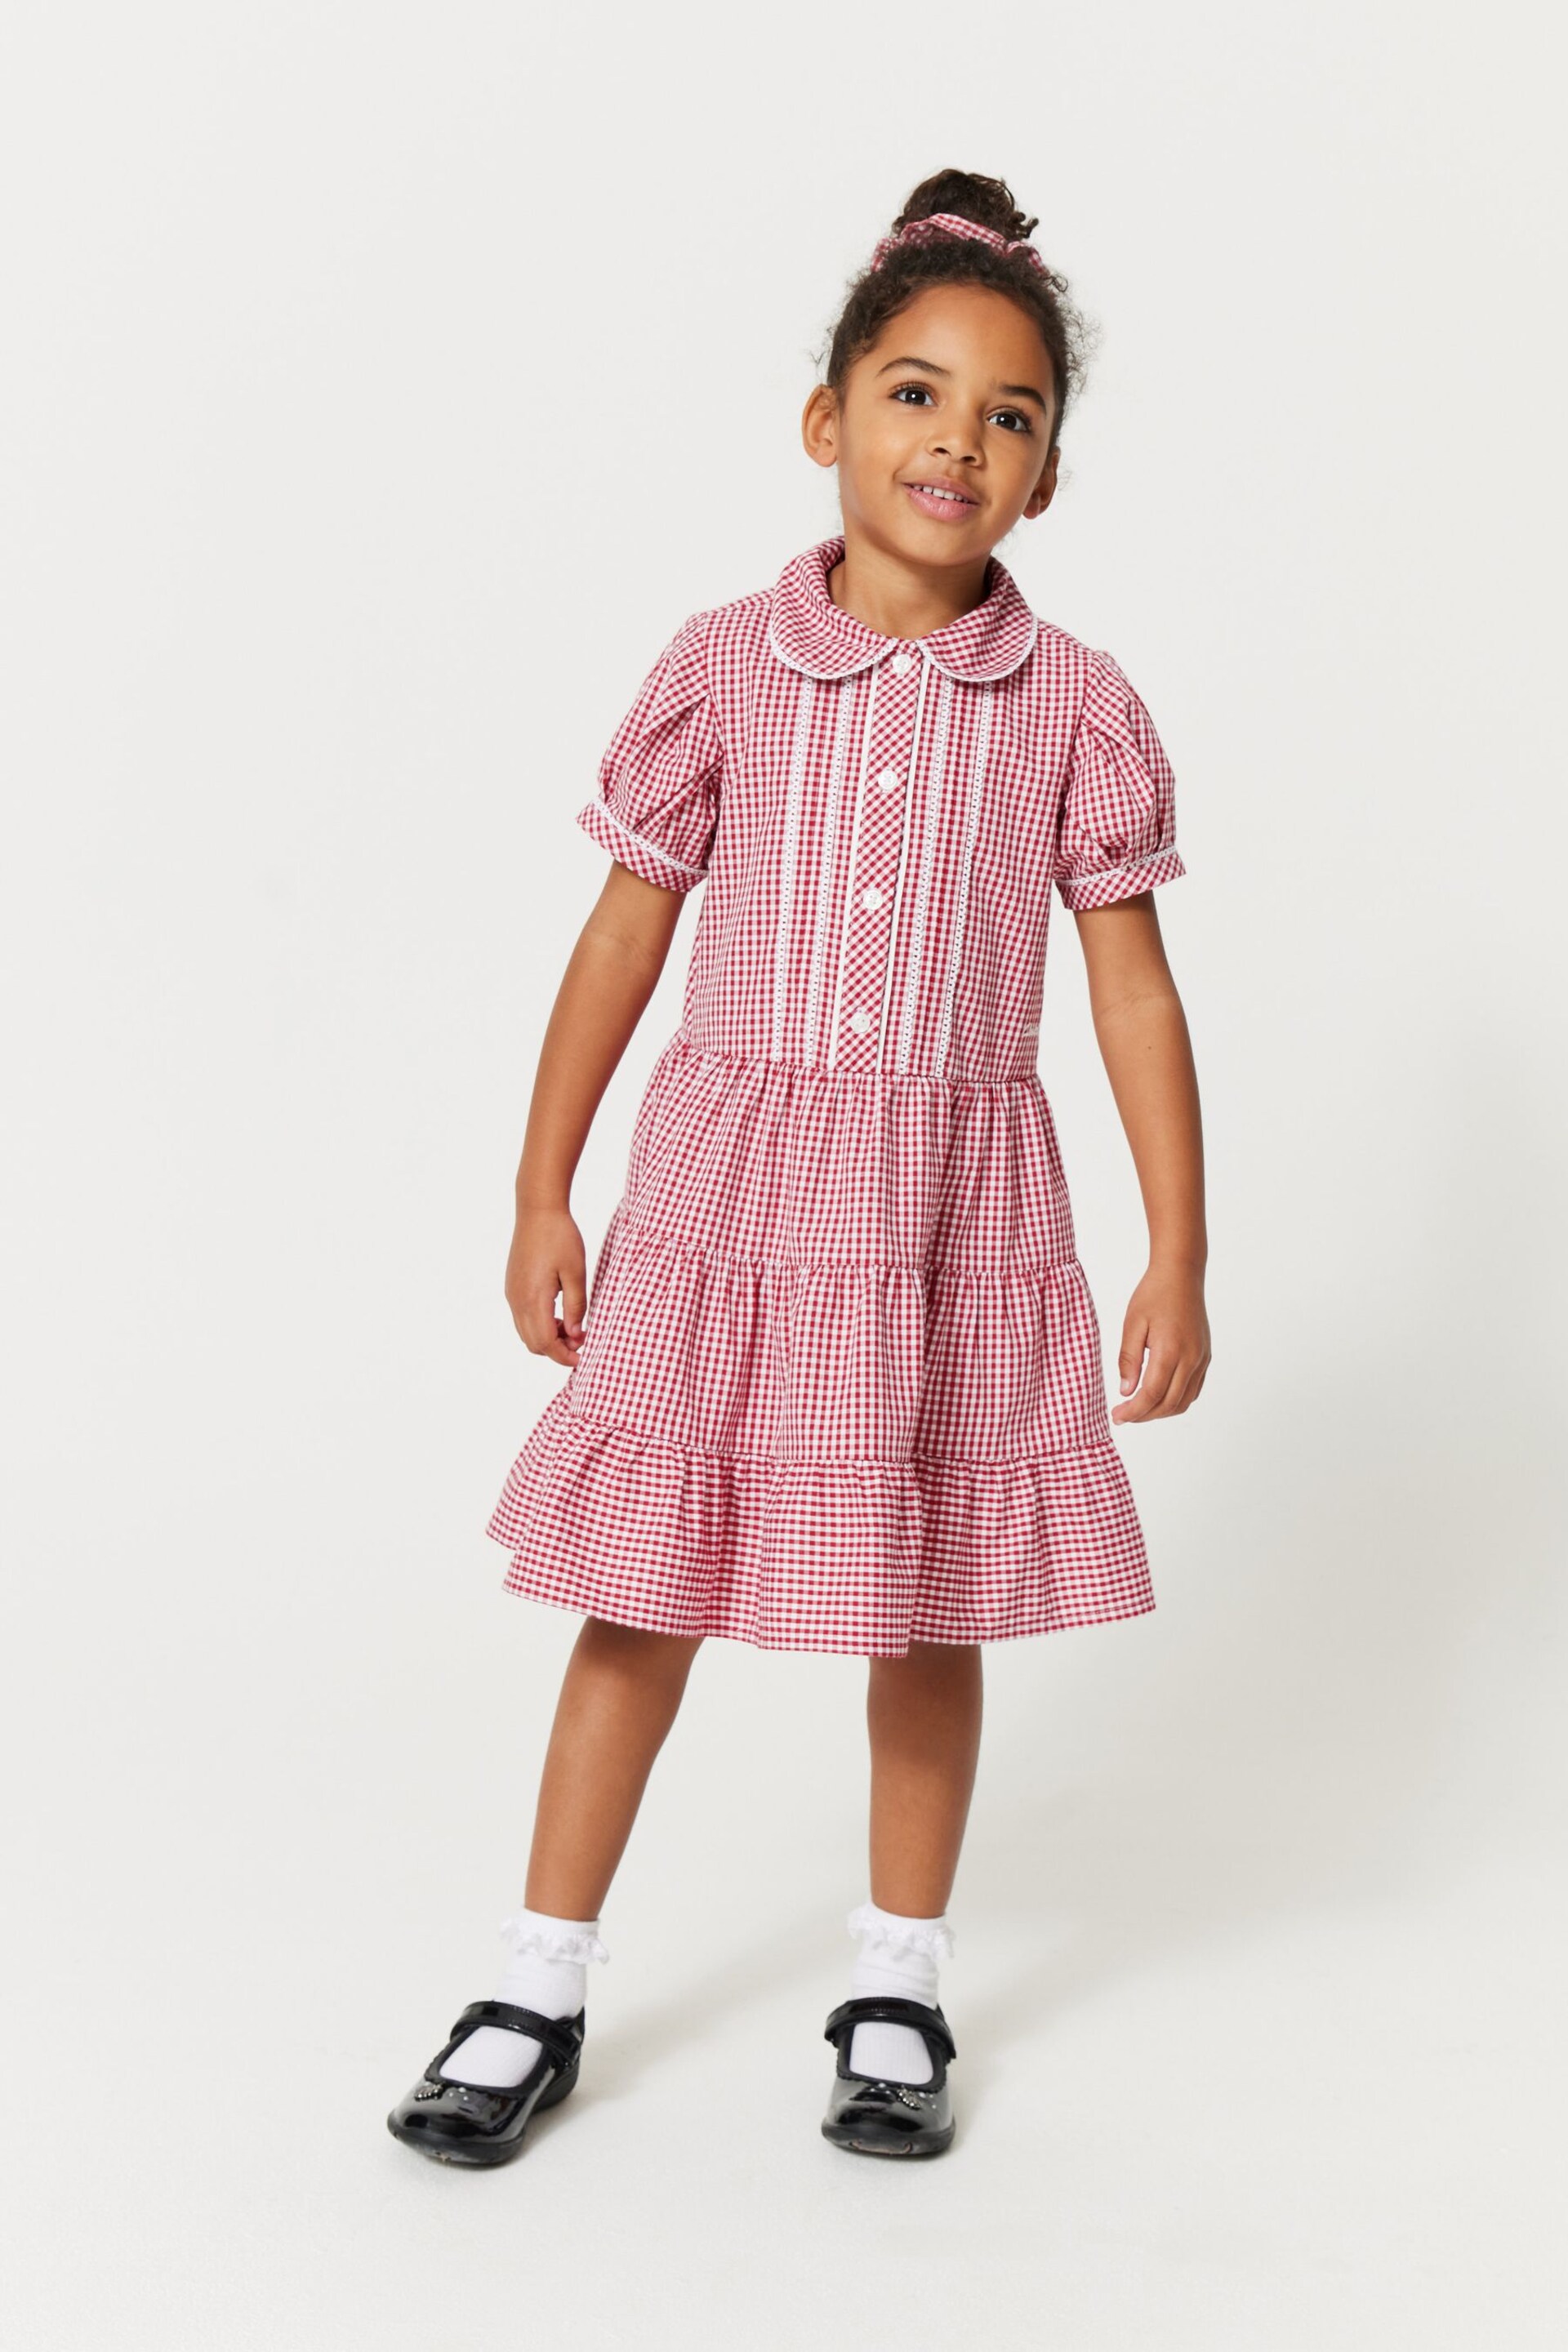 Clarks Red Clarks Gingham School Dress and Scrunchie Set - Image 1 of 11